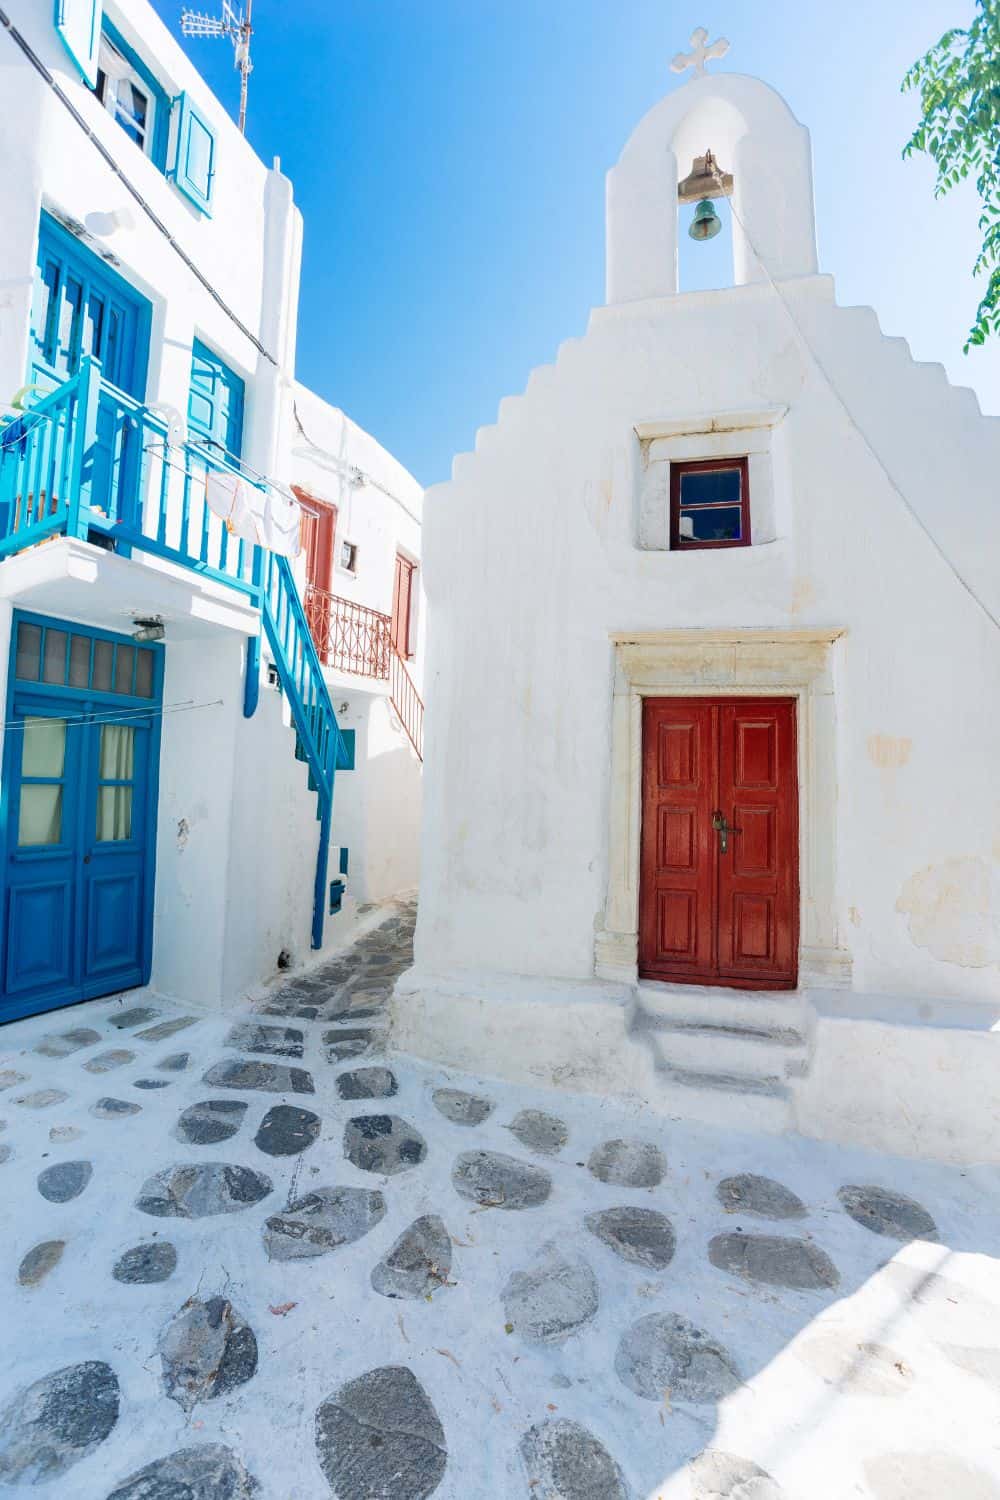 A charming narrow alley in Mykonos, with a white-washed church featuring a red door and blue-framed window. The cobbled path and bright blue and red accents on the buildings highlight the traditional Cycladic architecture.